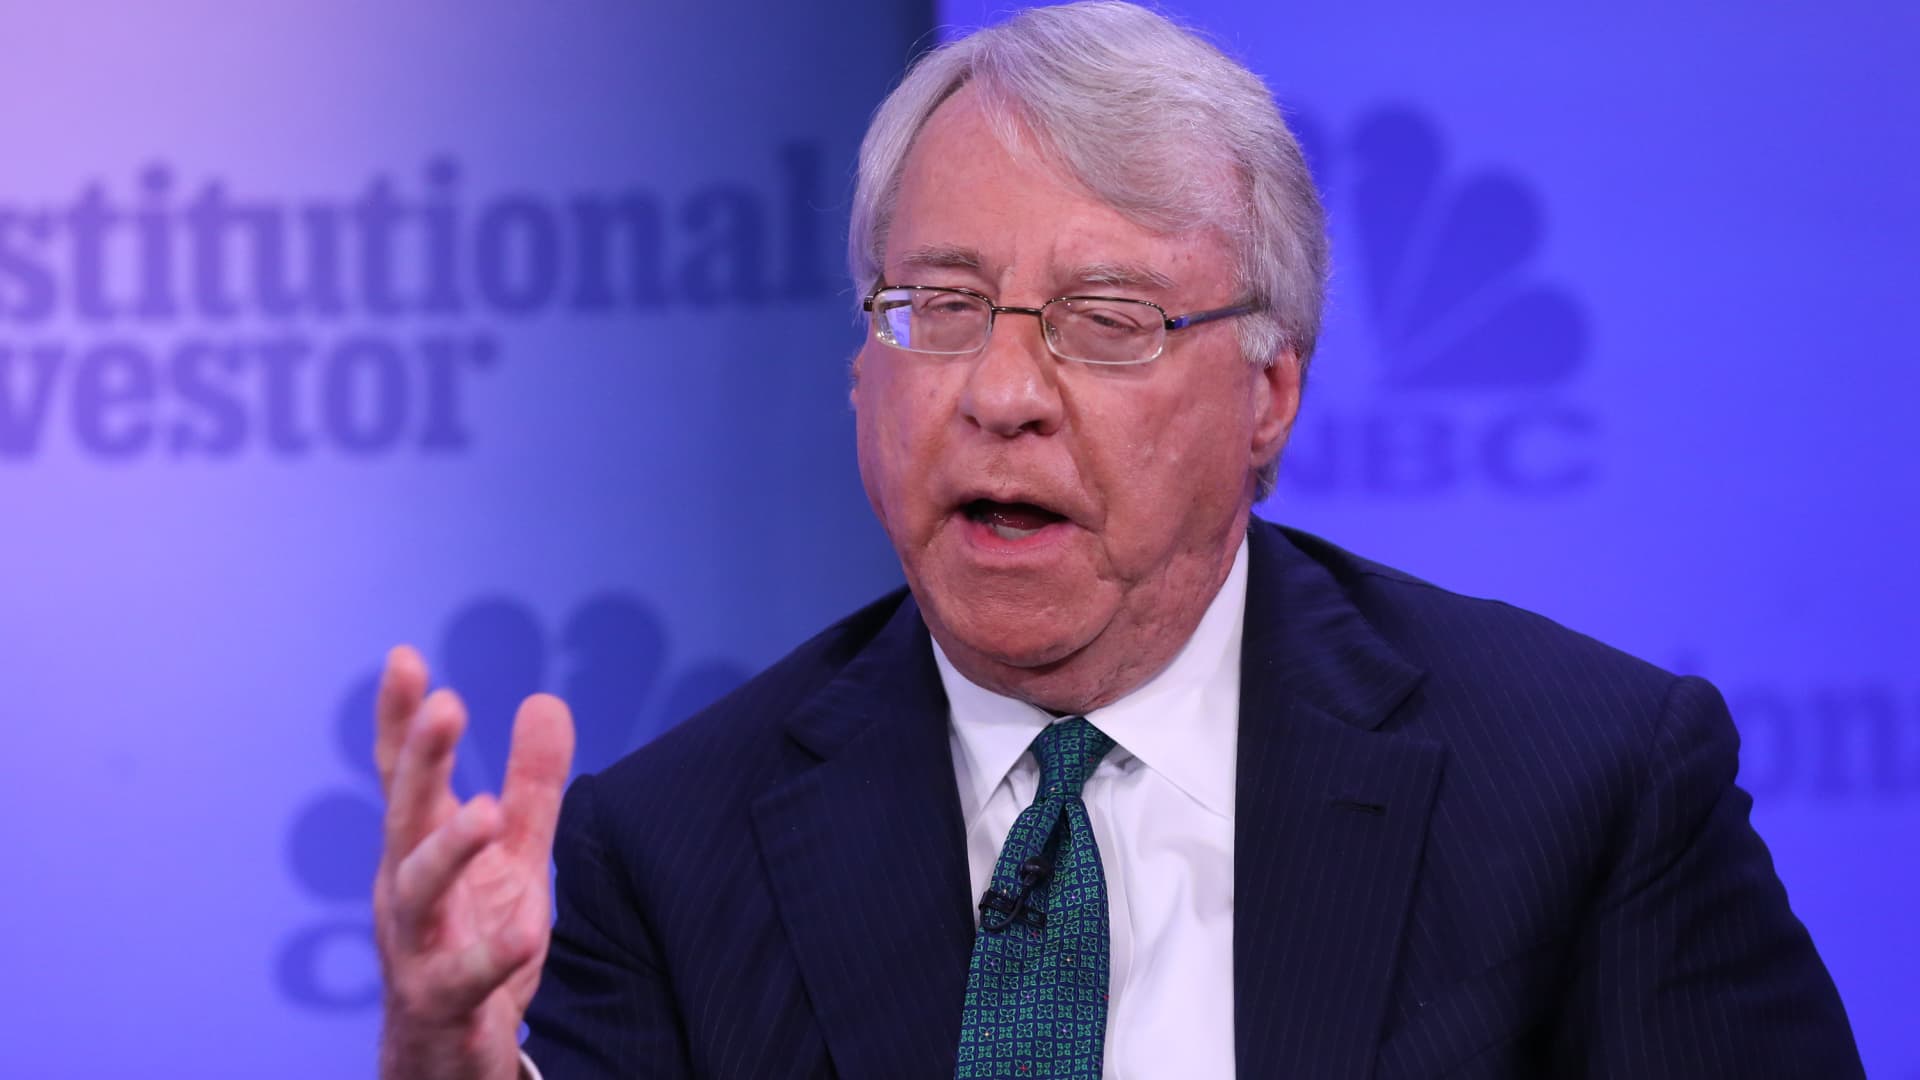 Jim Chanos debuts new short bets against data centers, sending shares down